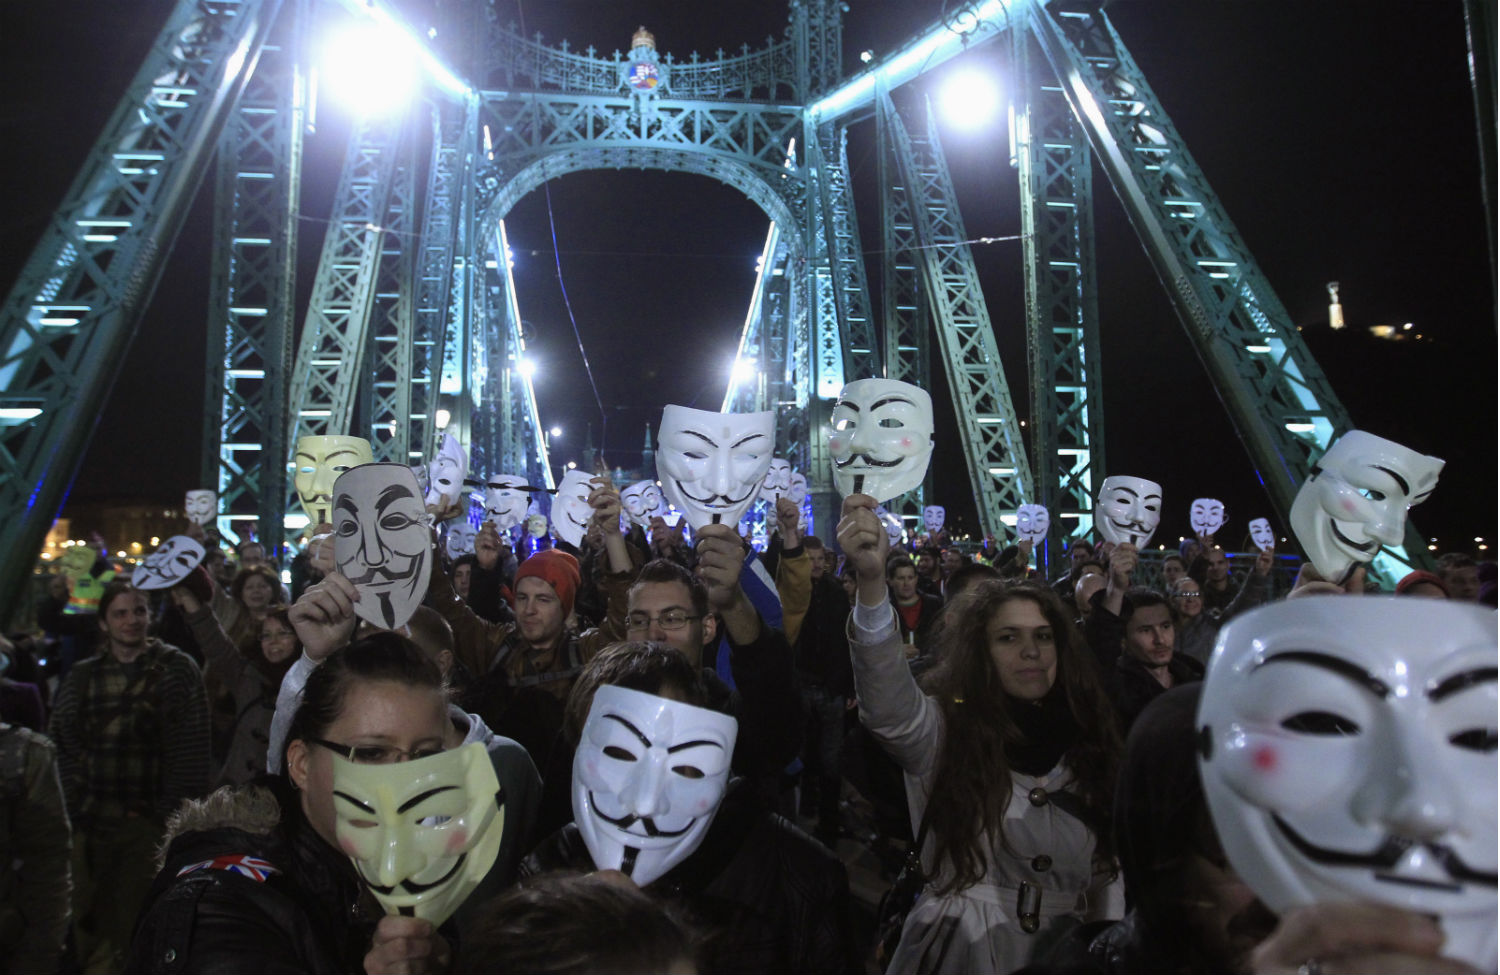 An Inside Look at Anonymous, the Radical Hacking Collective